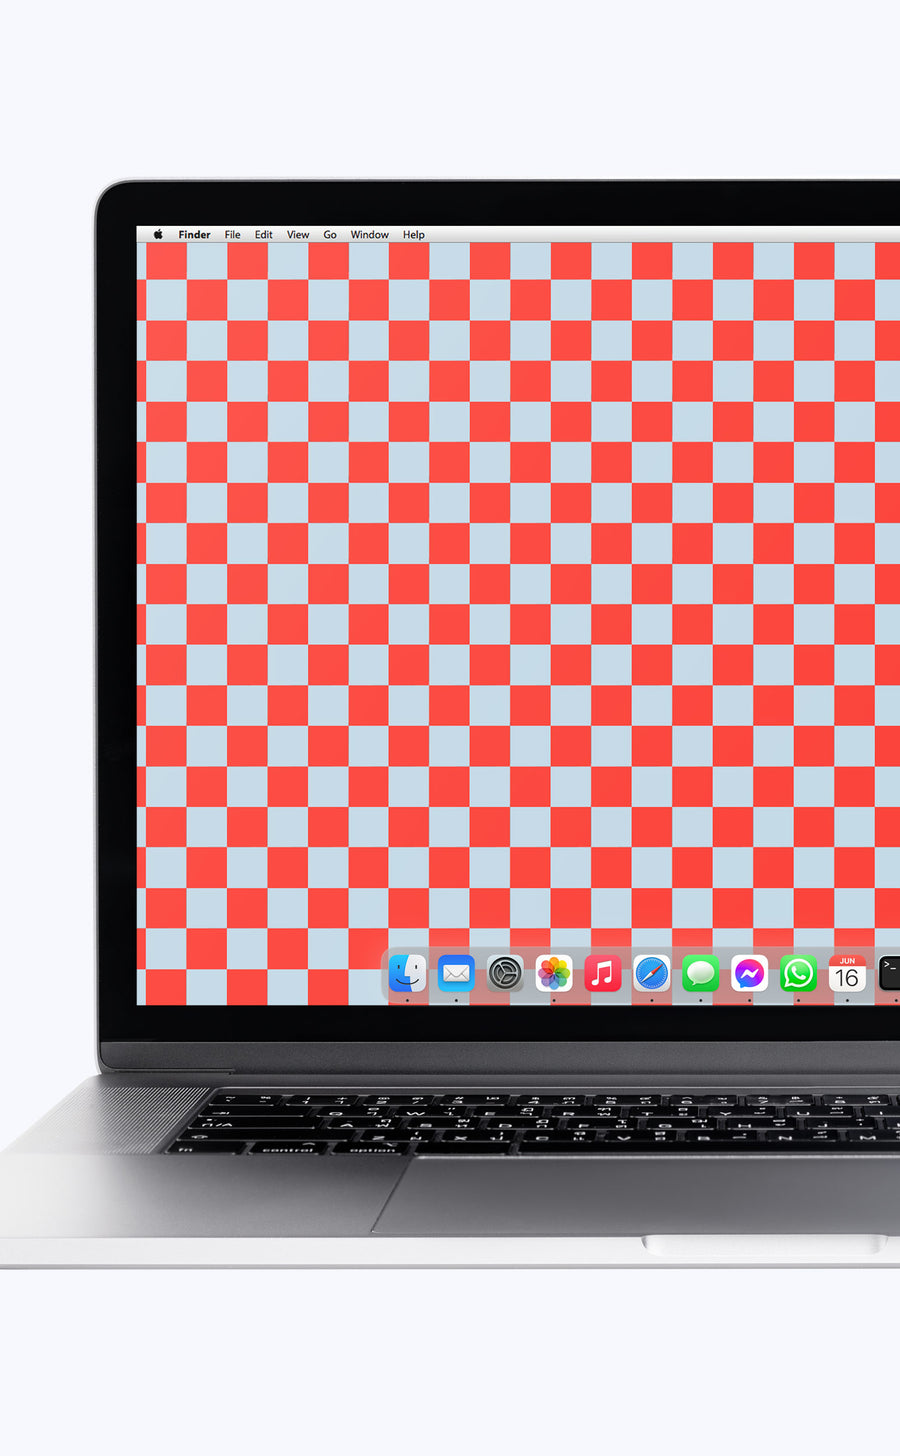 Red and Blue Checkerboard | Digital Laptop Wallpaper